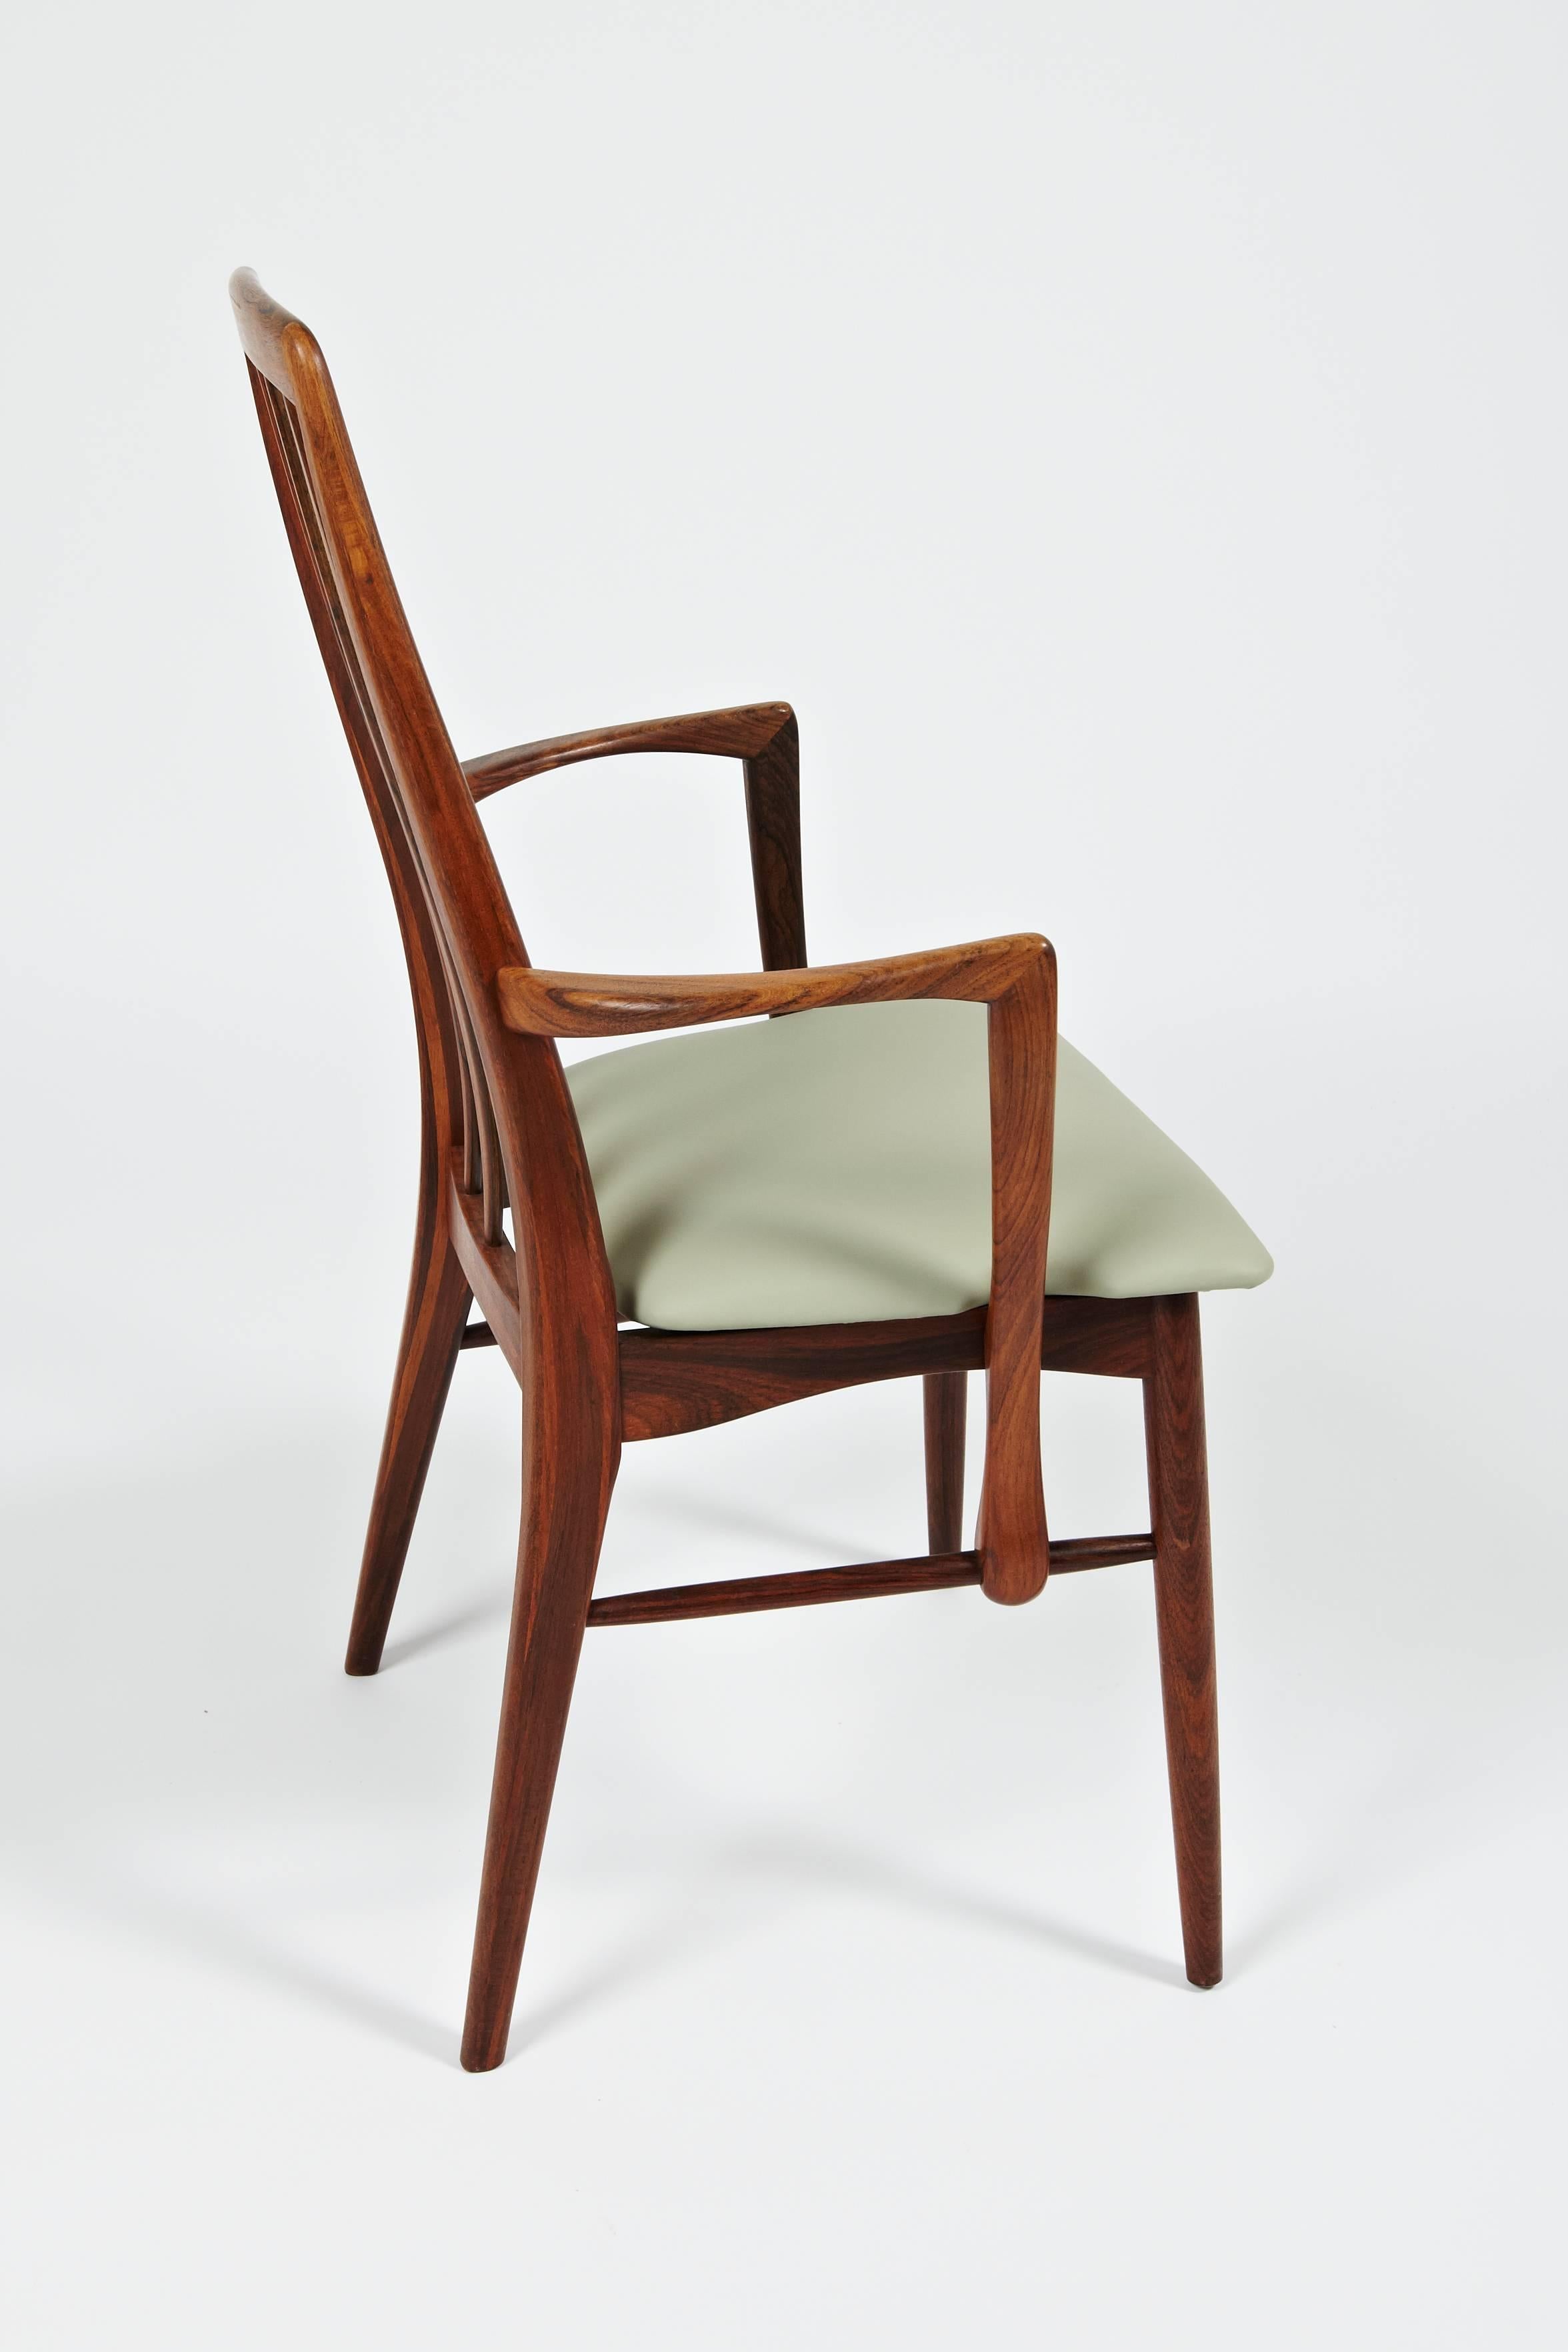 Niels Kofoed Rosewood Dining Chair with Arms, circa 1964 In Excellent Condition For Sale In London, GB